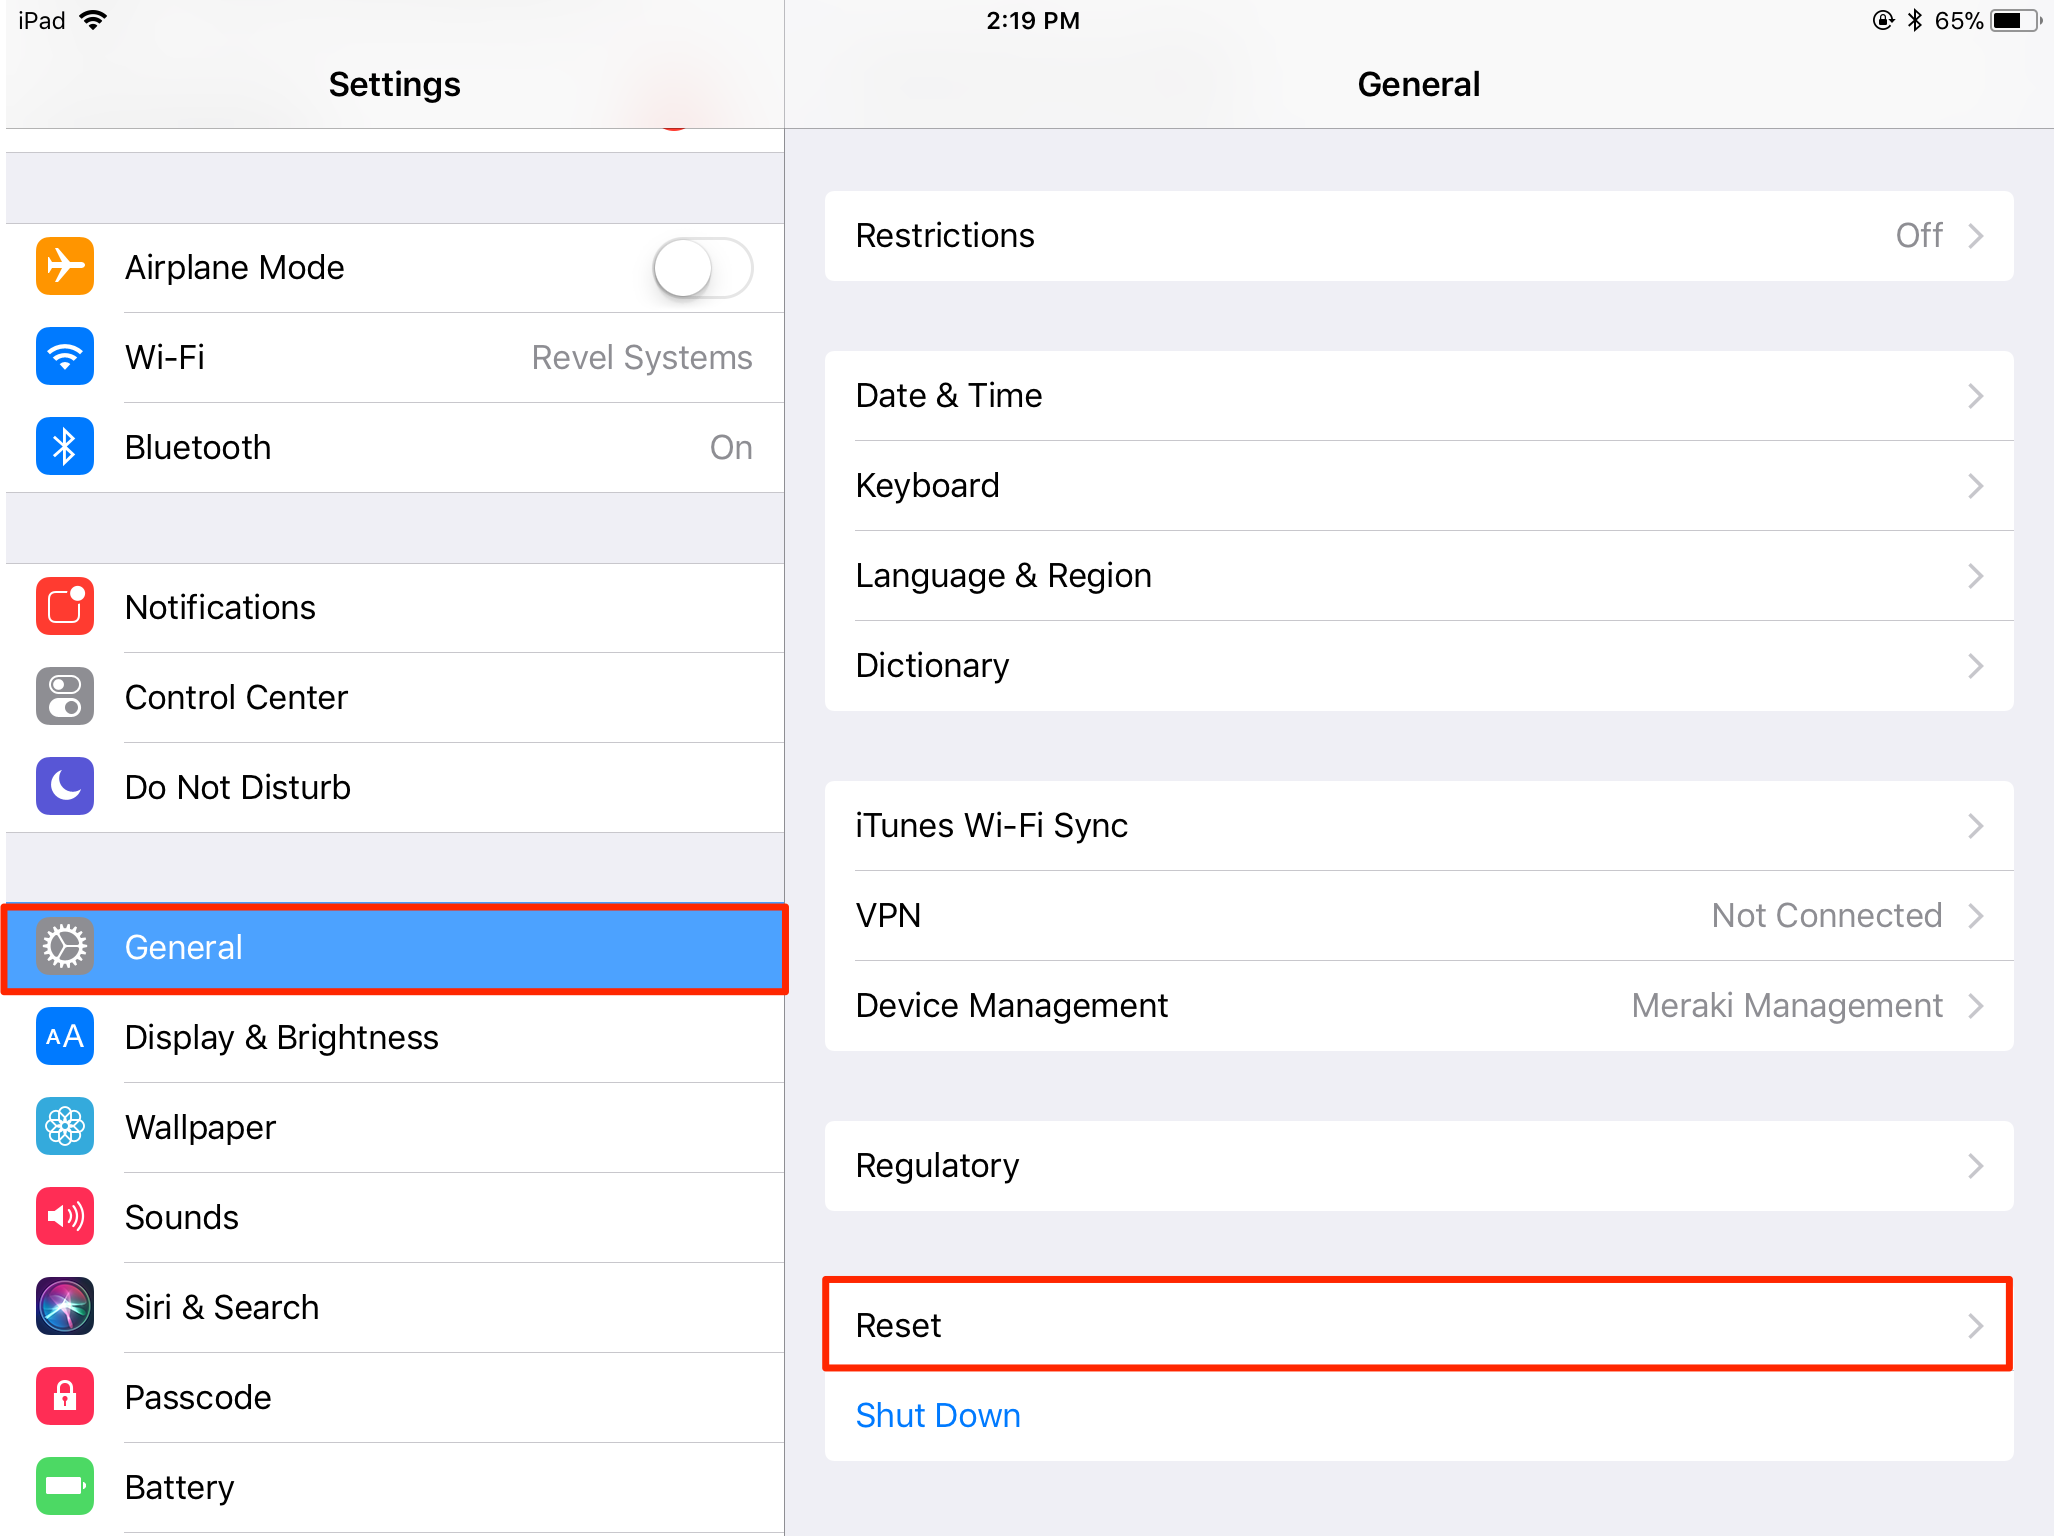 How to Reset iPad Network Settings